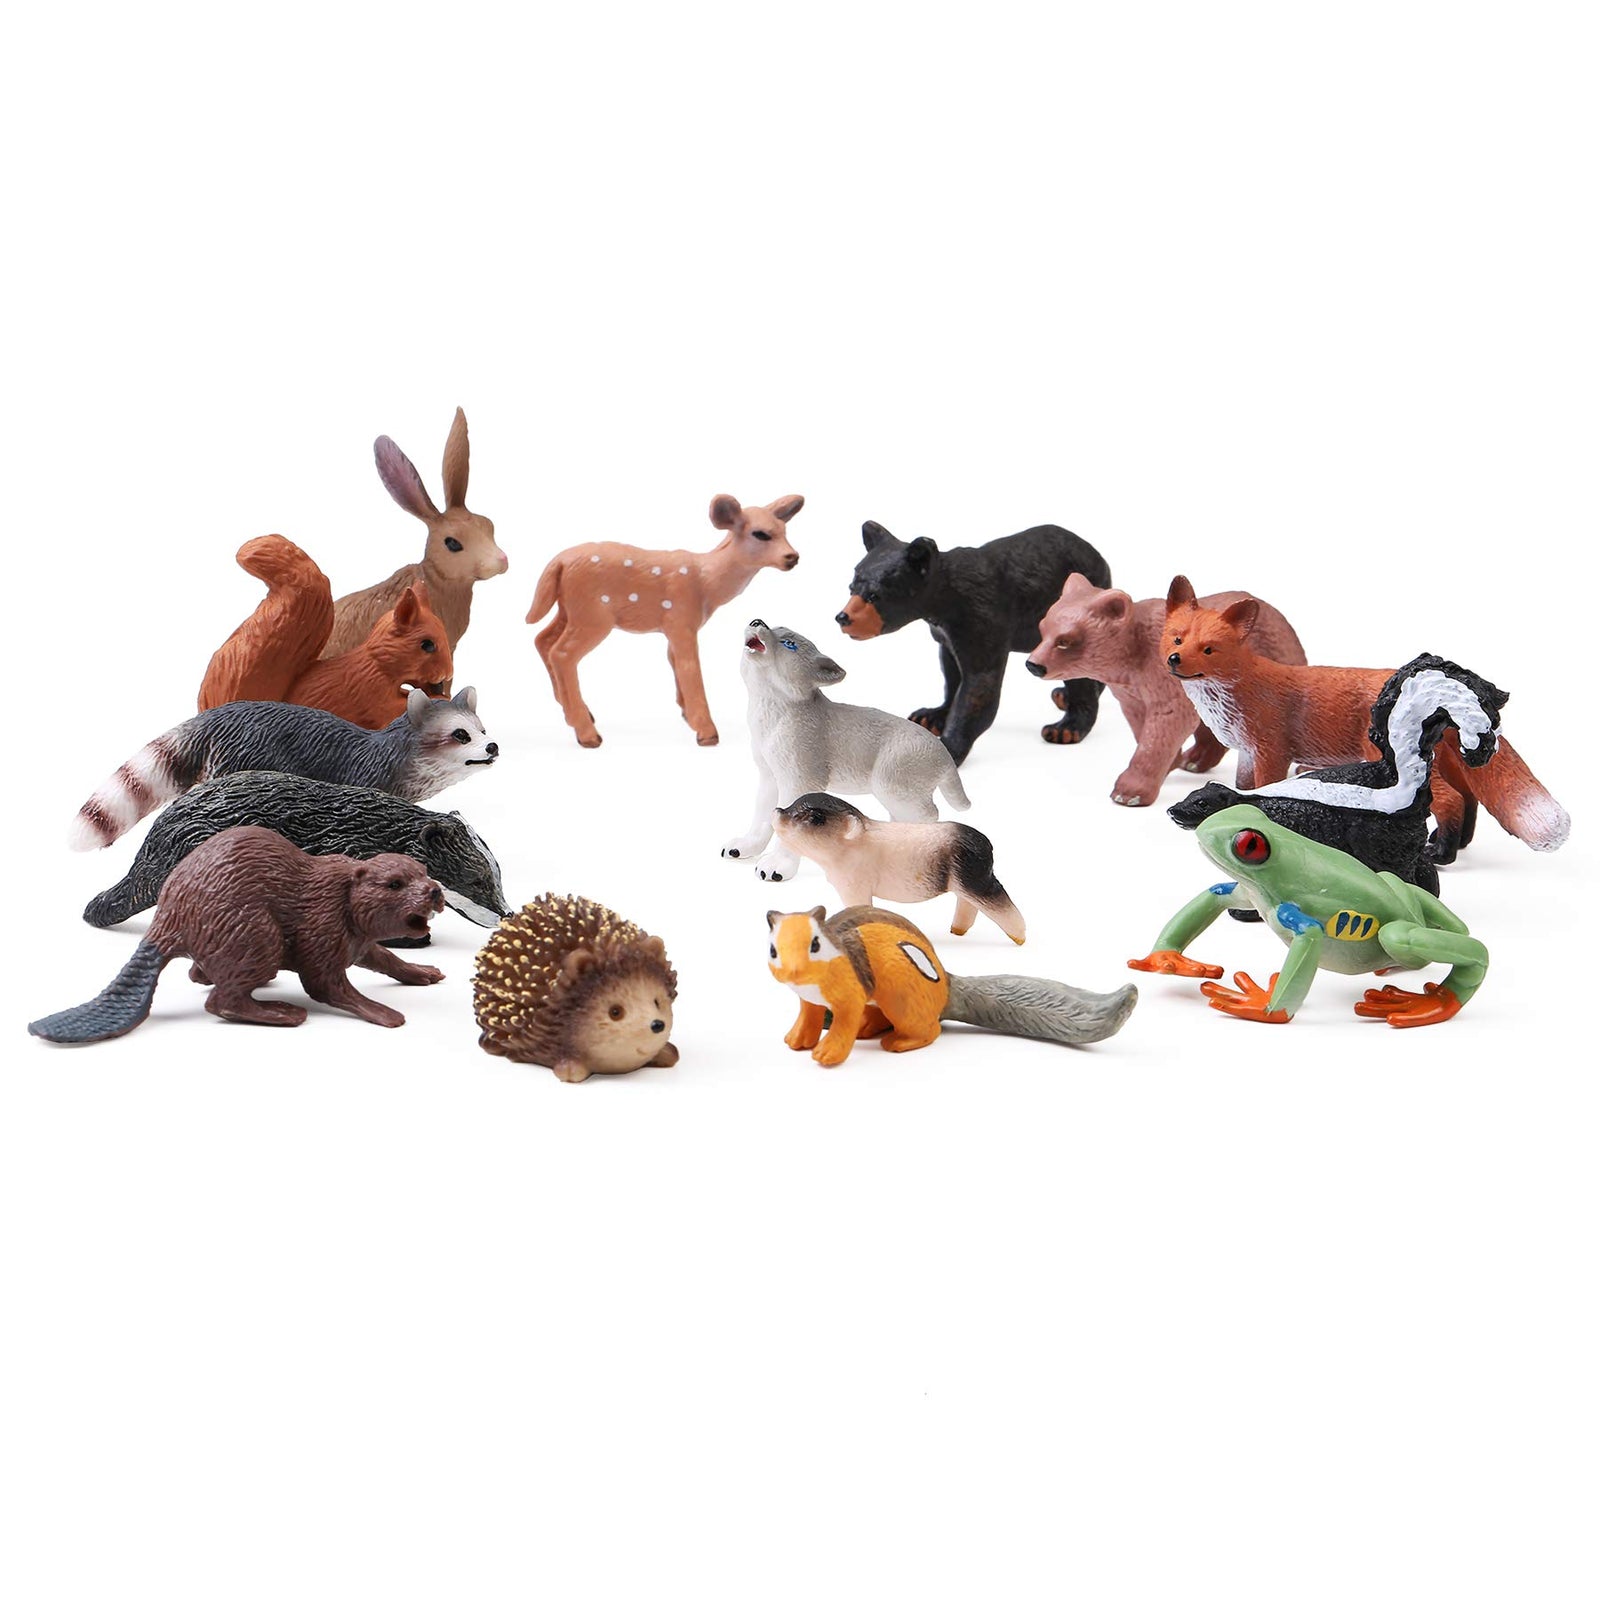 16pcs Forest Animals Baby Figures, Woodland Creatures Figurines, Miniature Toys Cake Toppers Cupcake Toppers Birthday Gift for Kids